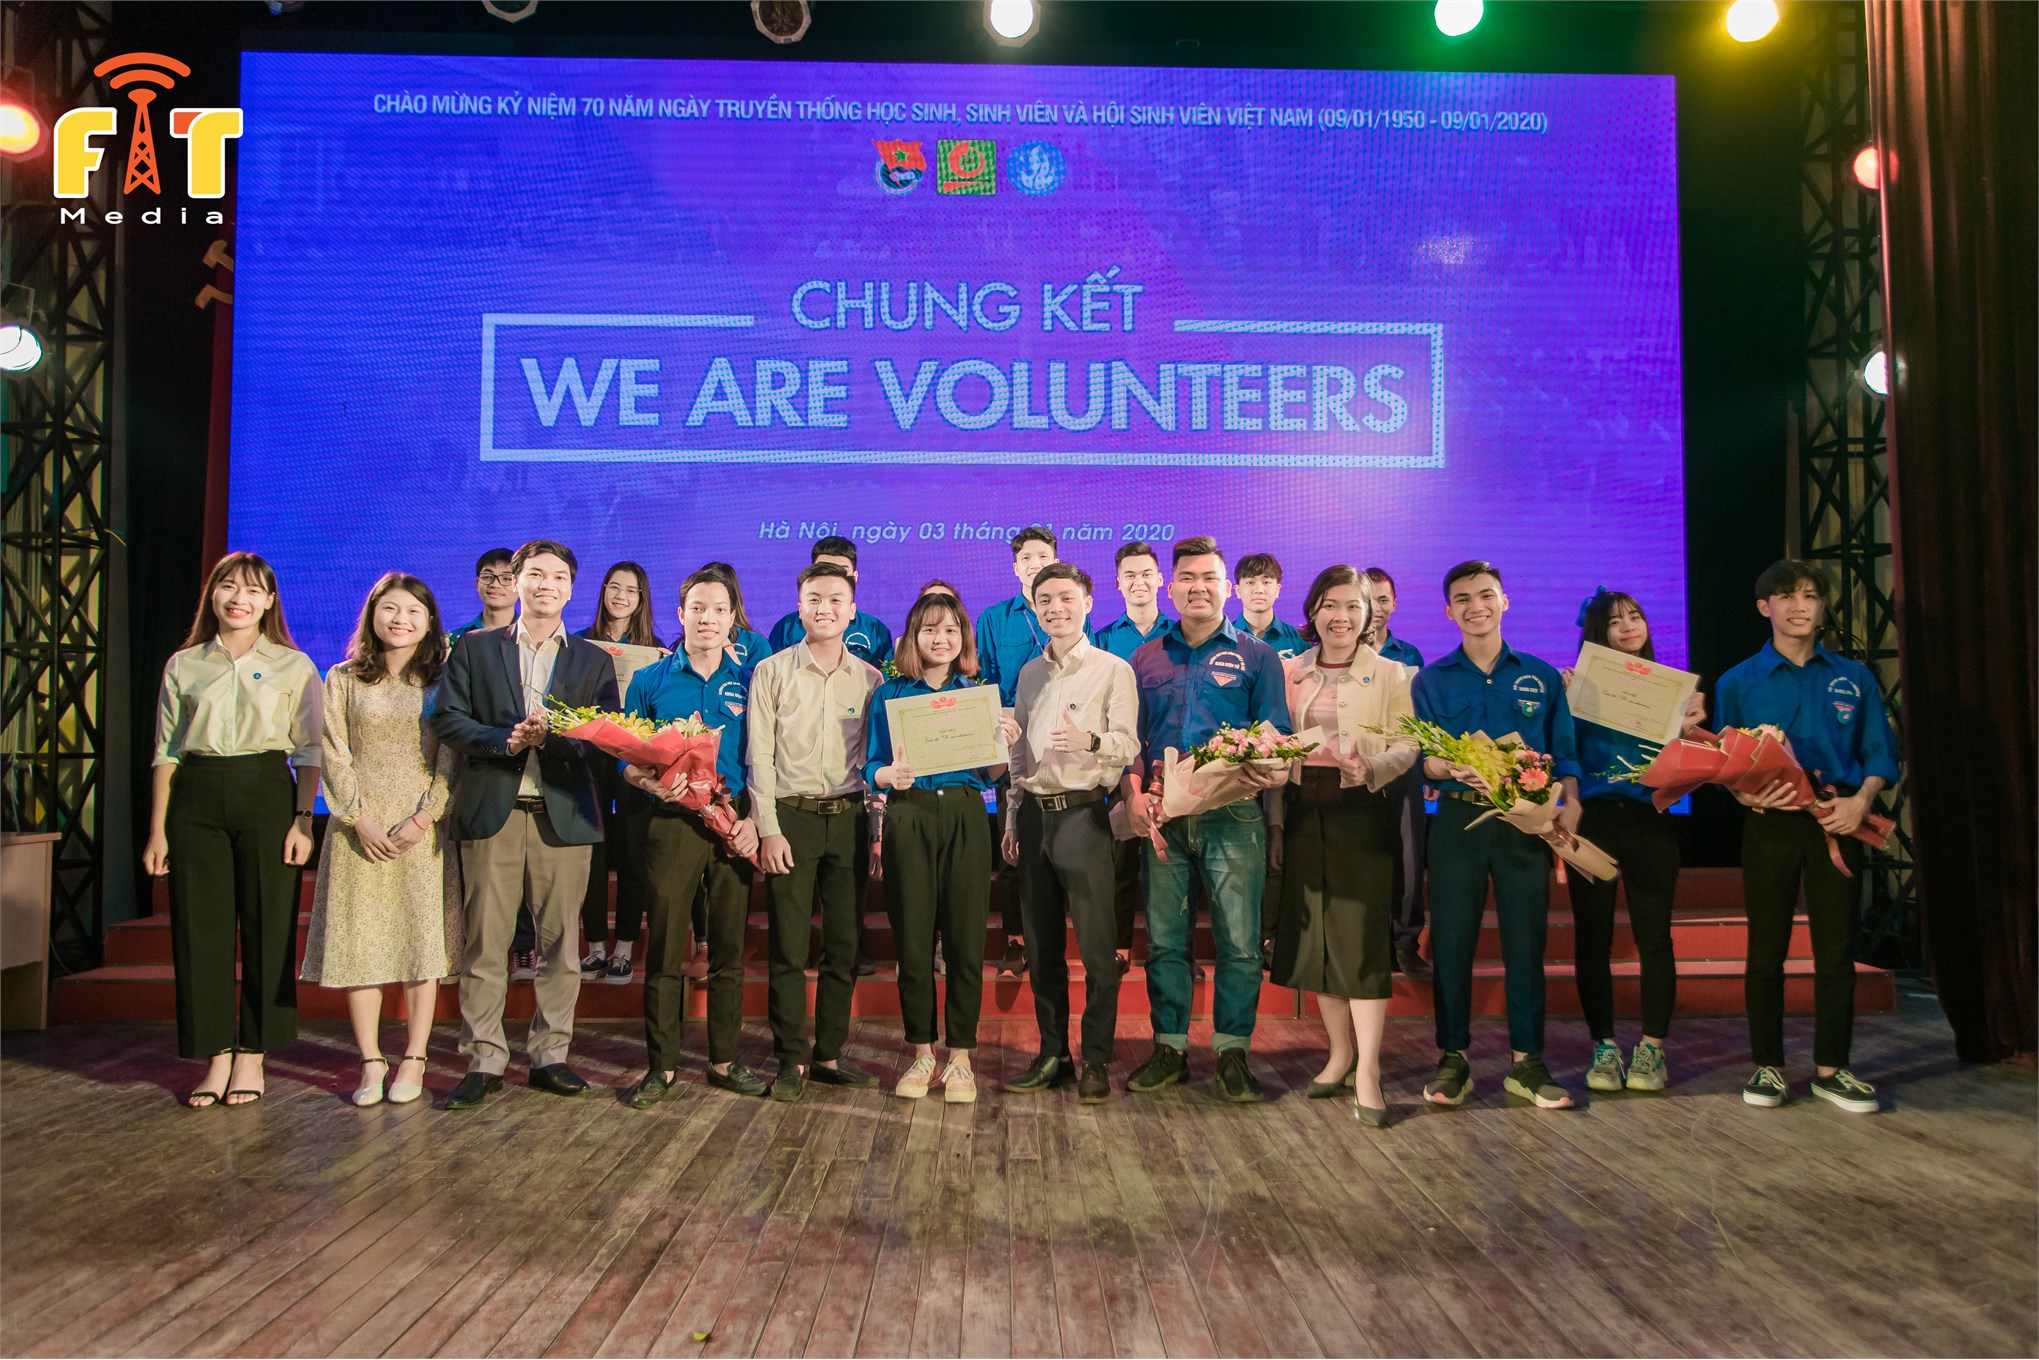 Chung kết cuộc thi “We are volunteers”